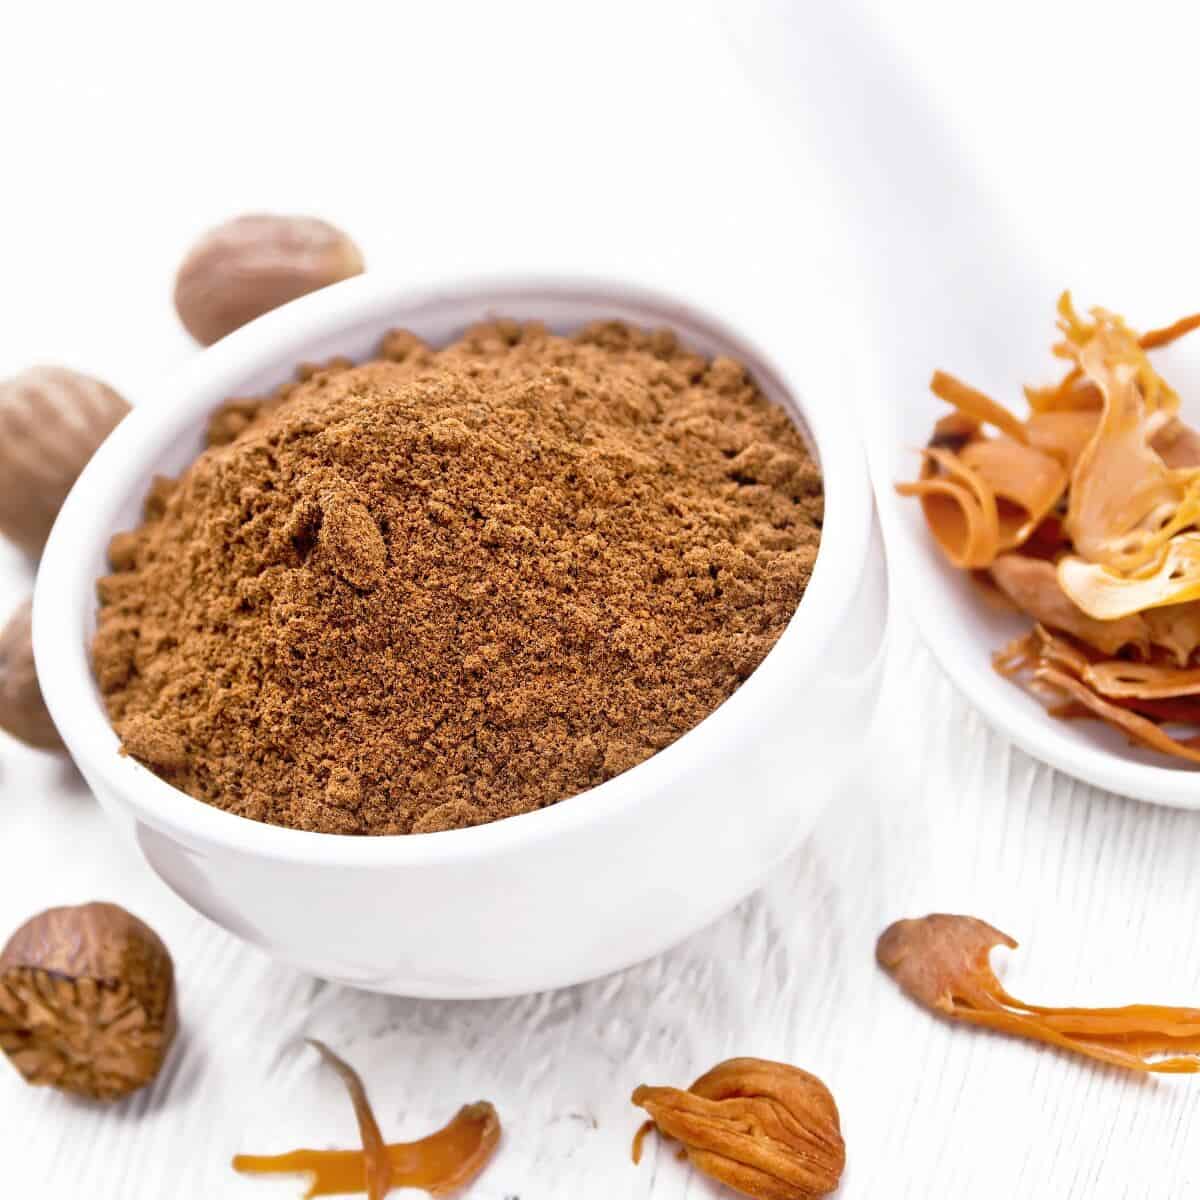 ground nutmeg in a bowl and dried nutmeg arillus in a spoon, whole nuts on white wooden board background